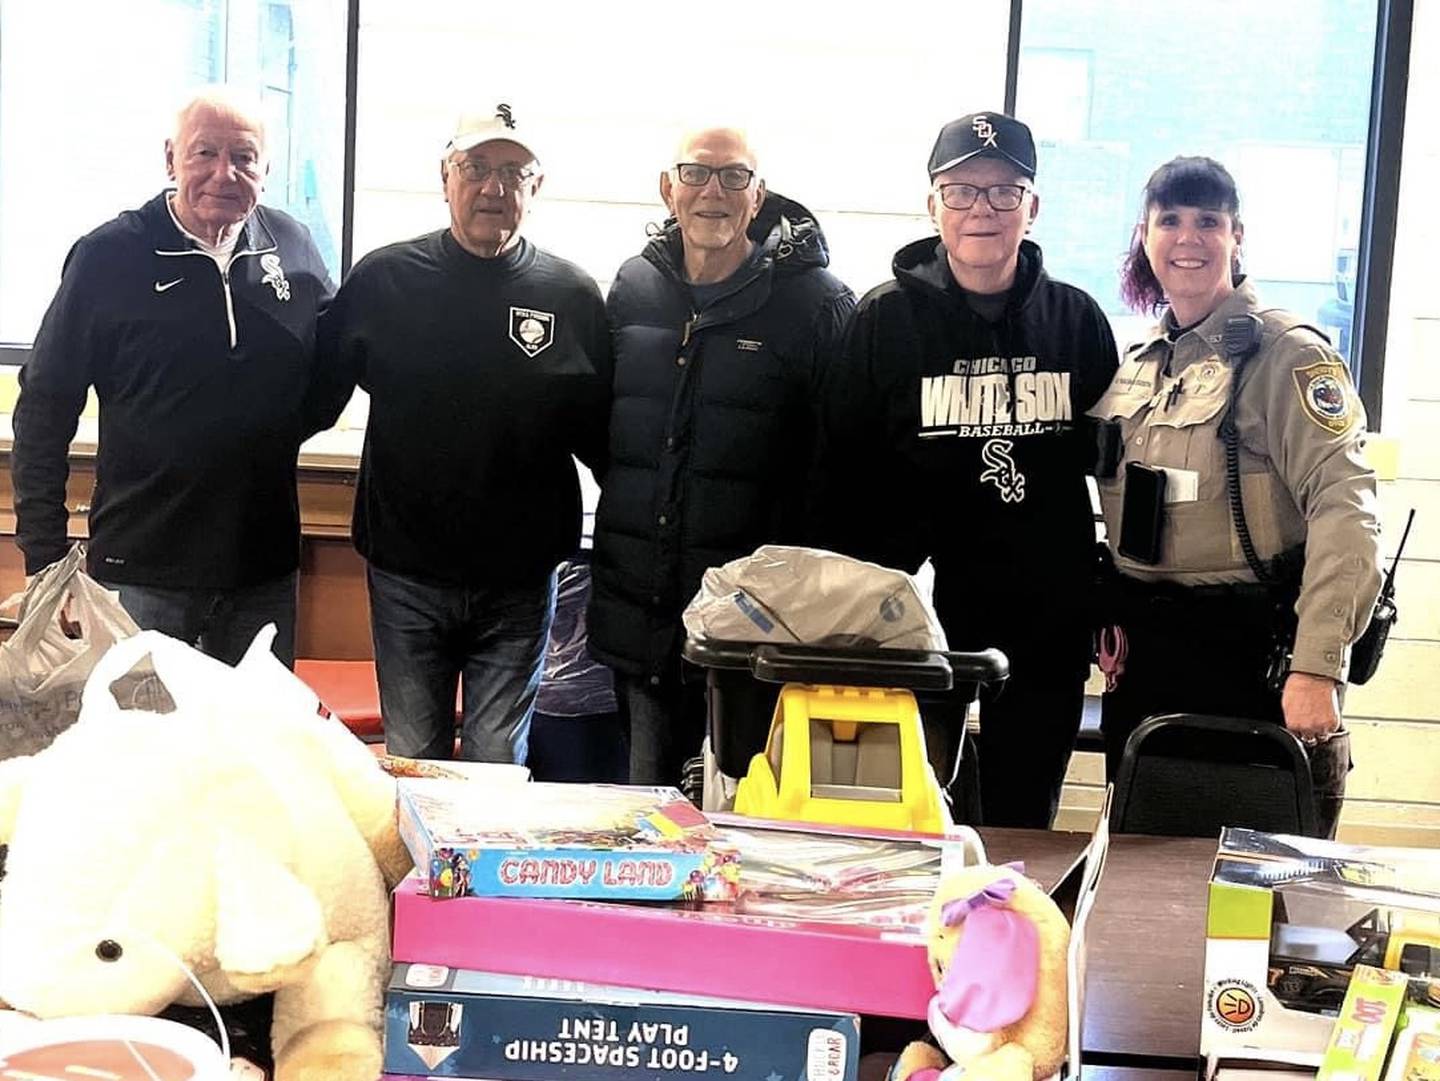 Members of the Utica Fireside White Sox Club pose with a La Salle County Sheriff's Deputy after donating to a holiday toy drive.